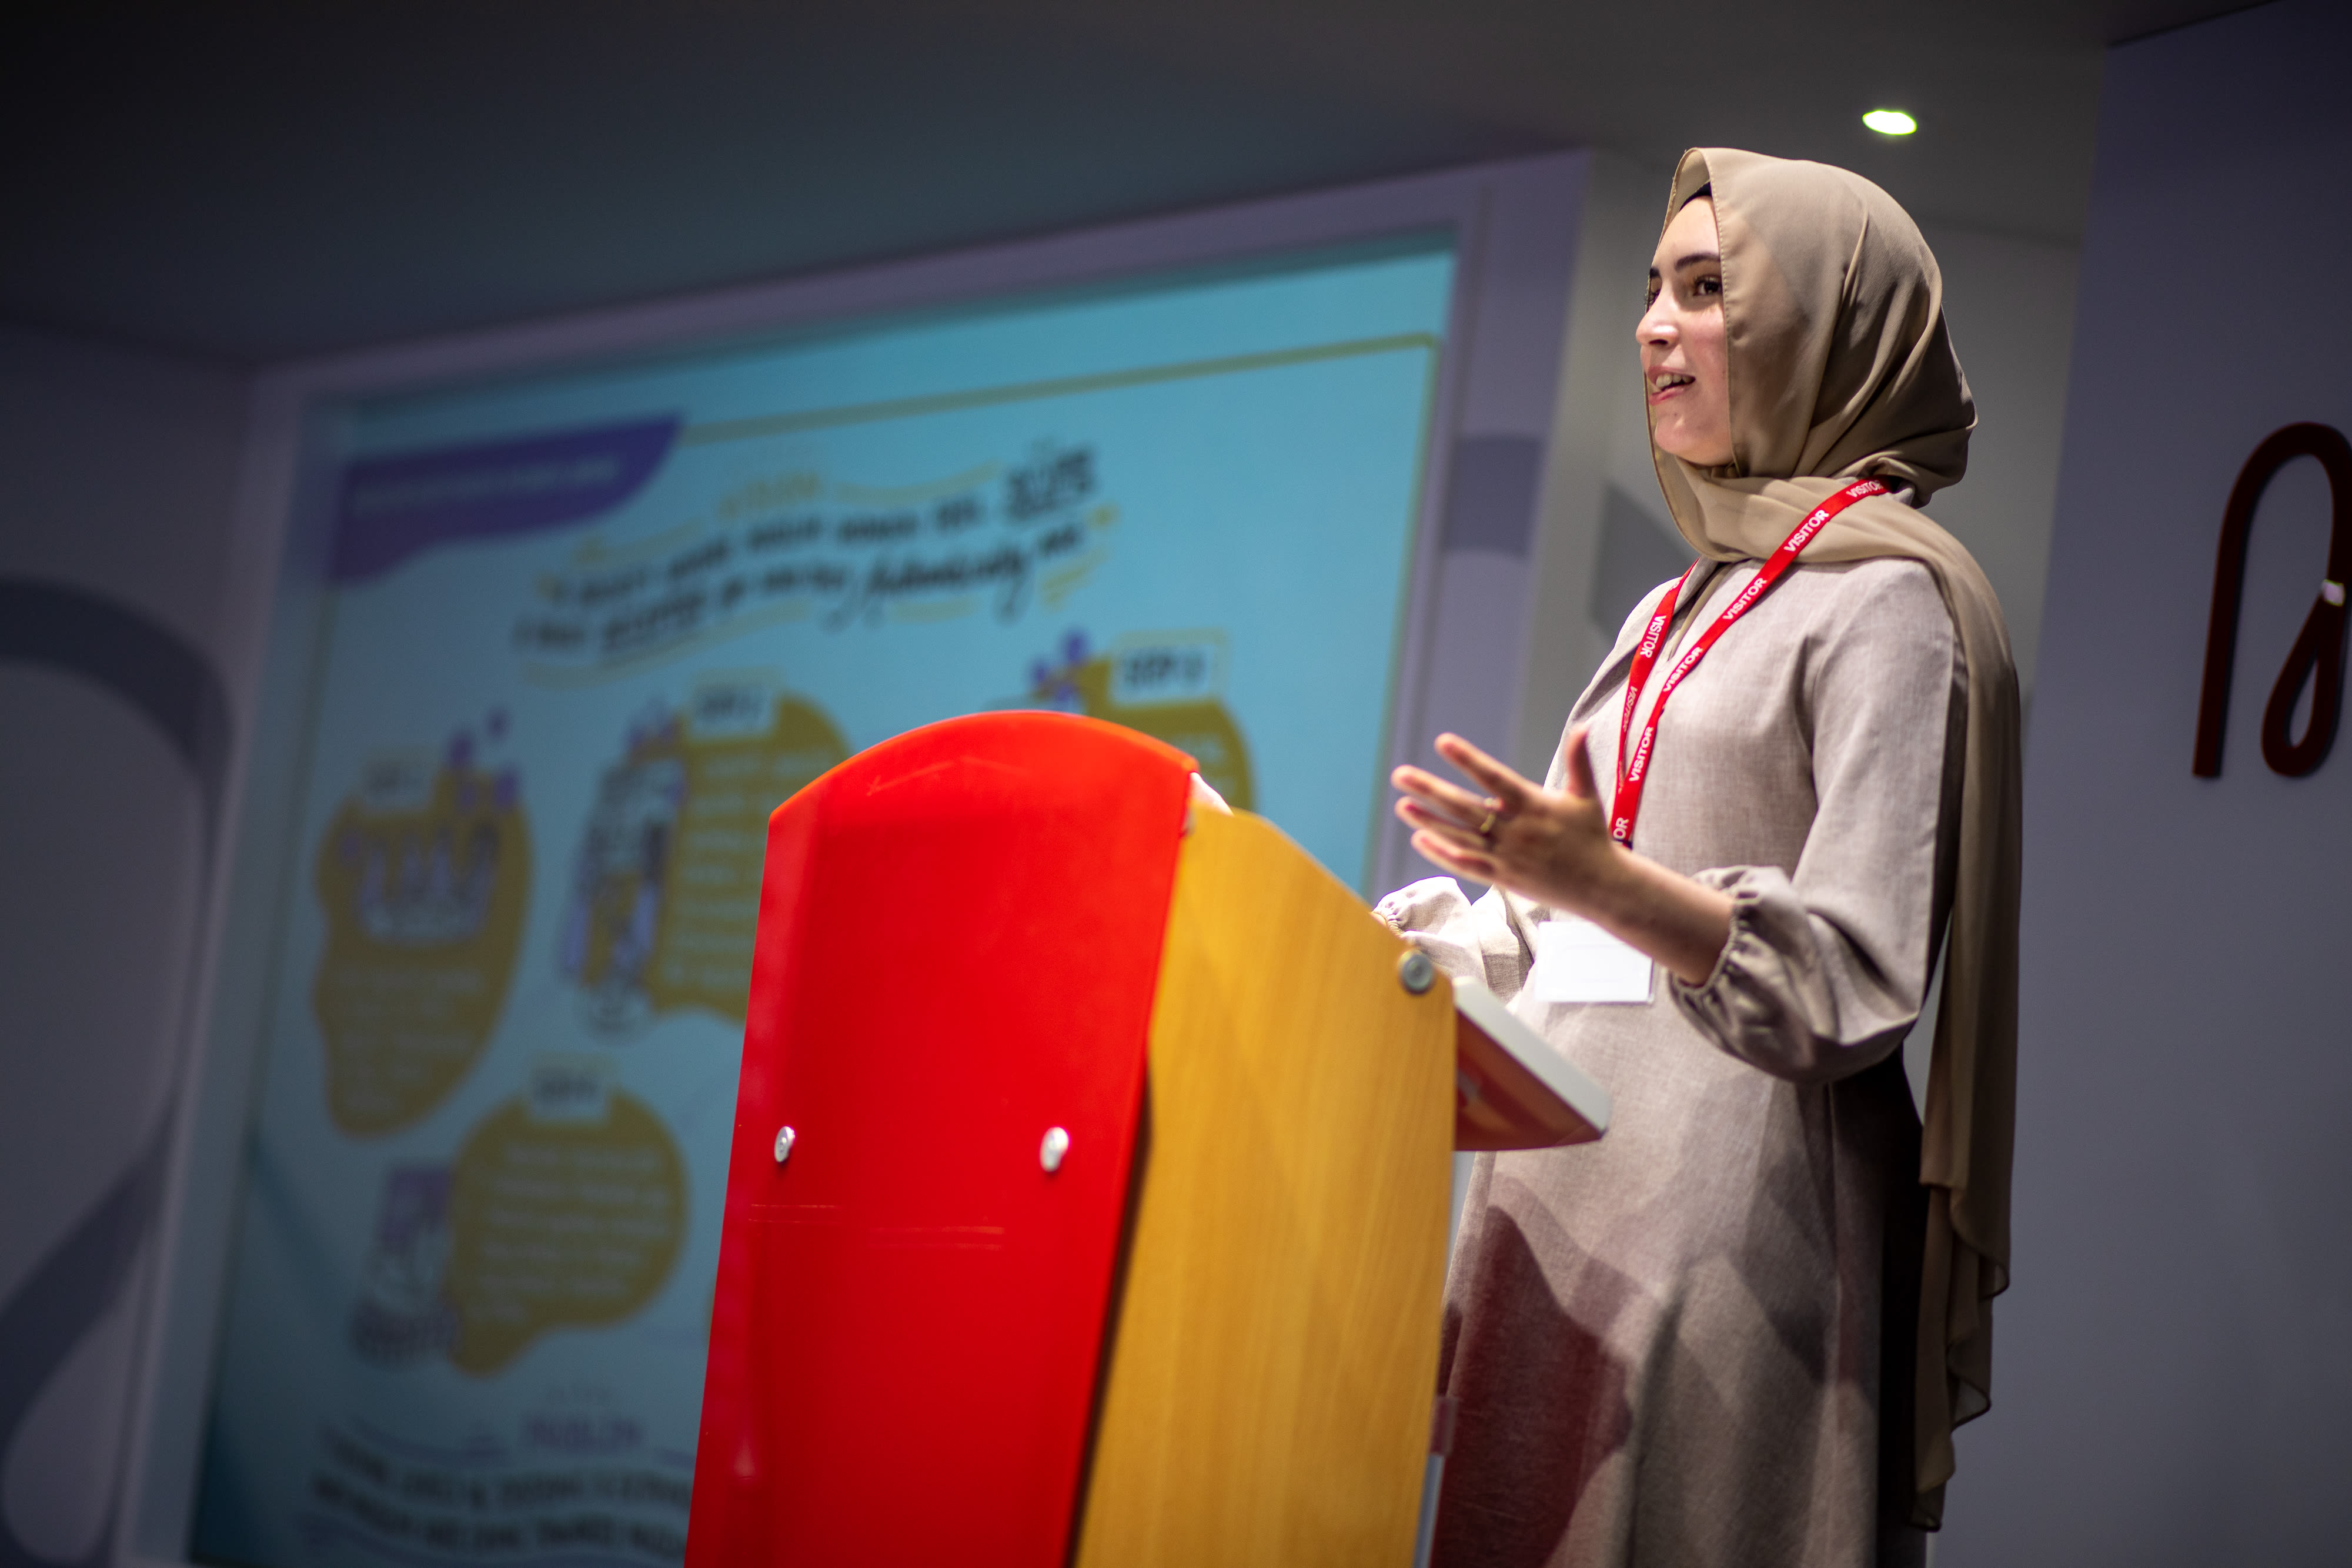 Roukagia speaking at an event with the Virgin Money Foundation